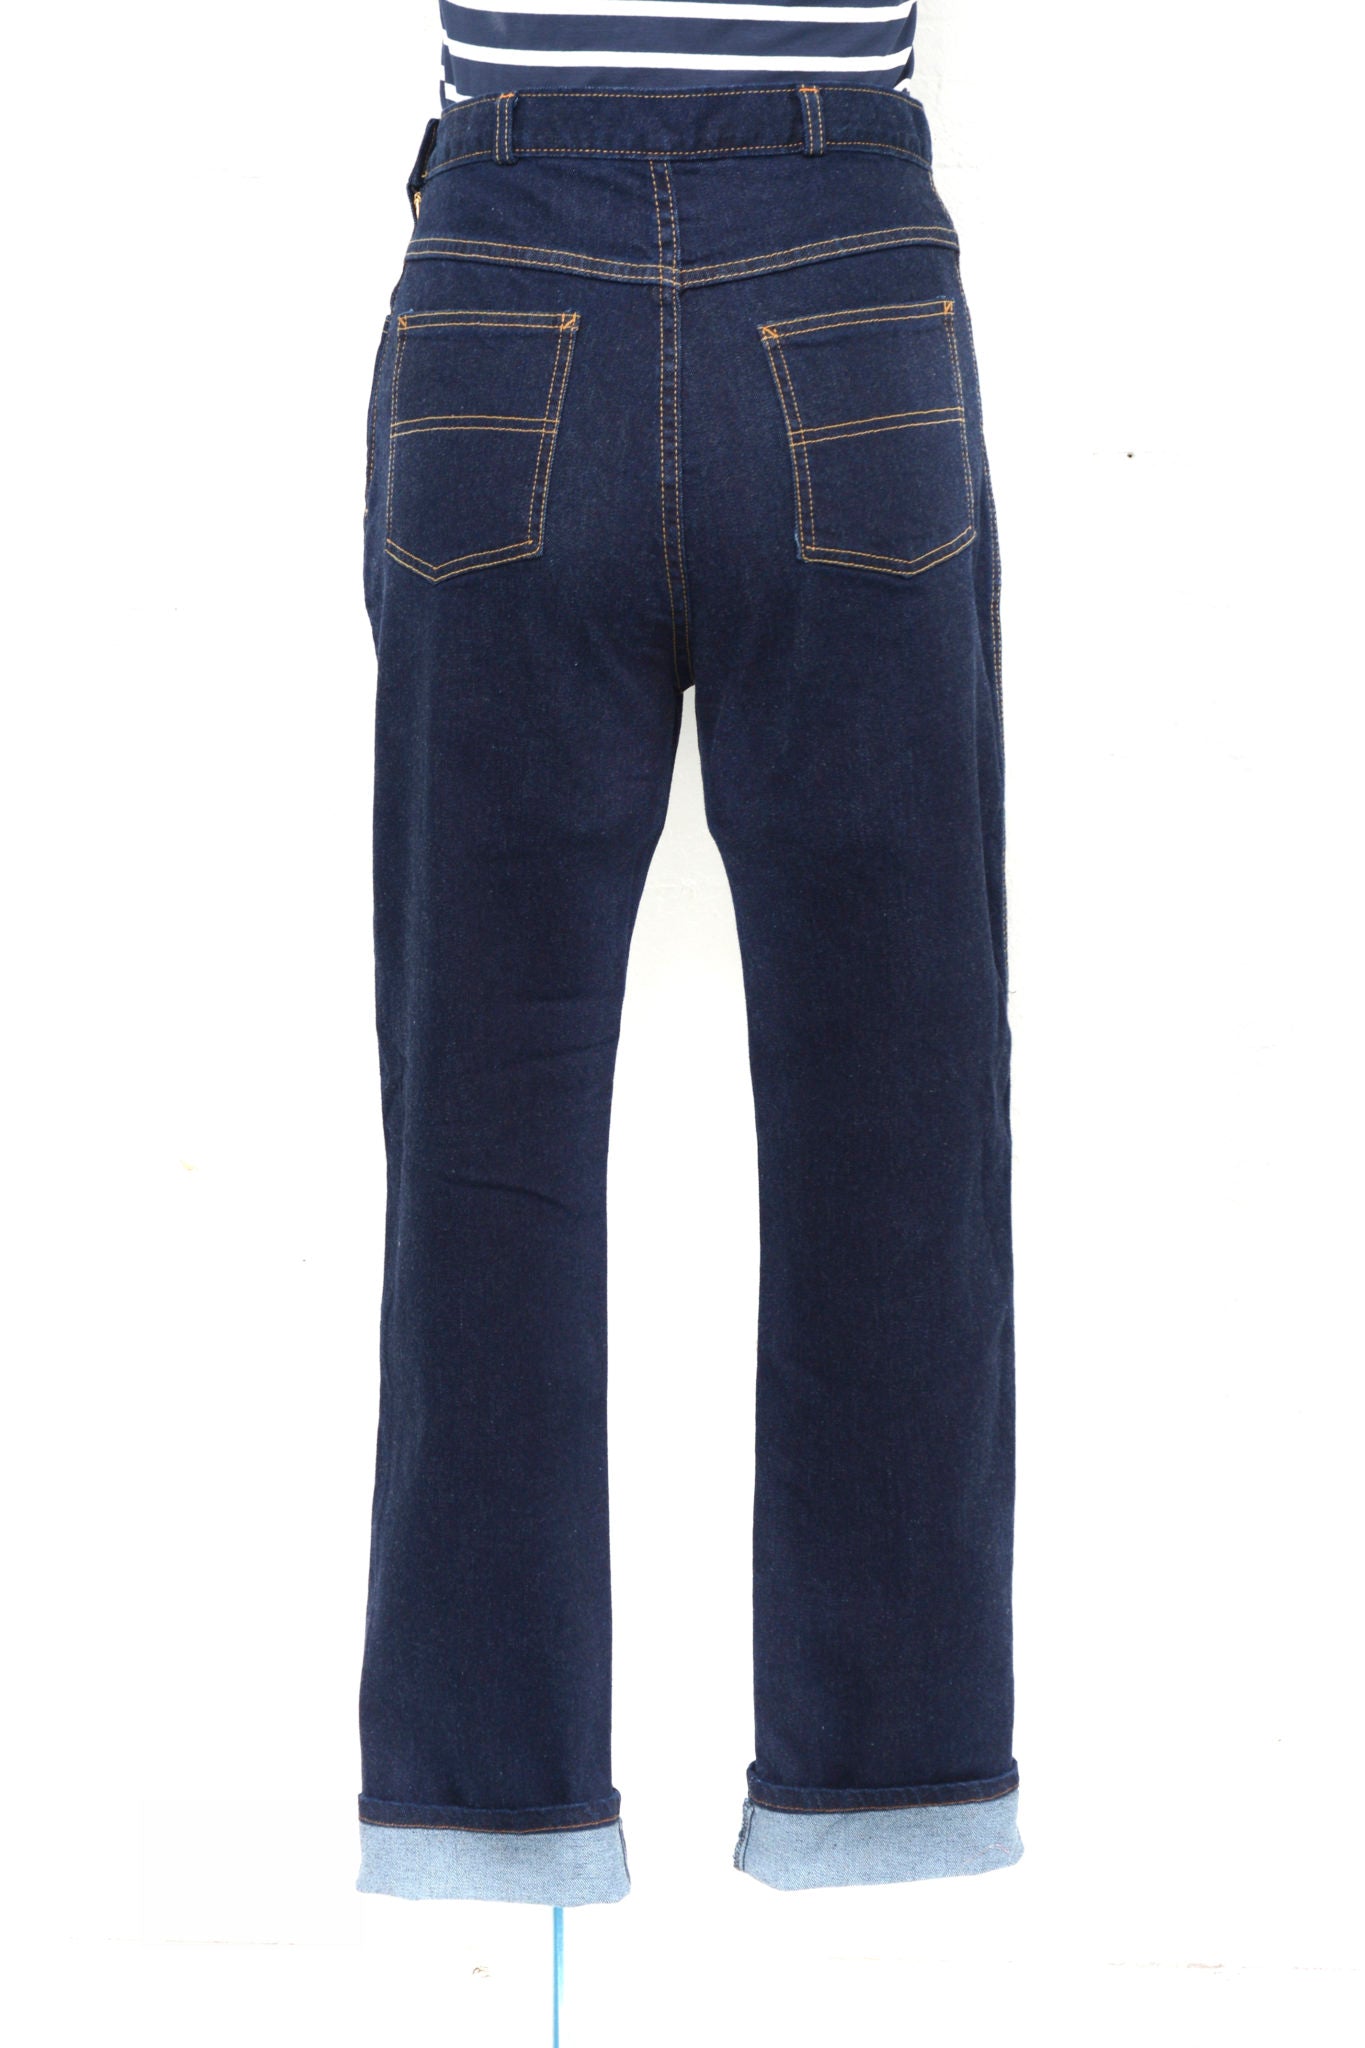 Caribou Rider Jeans